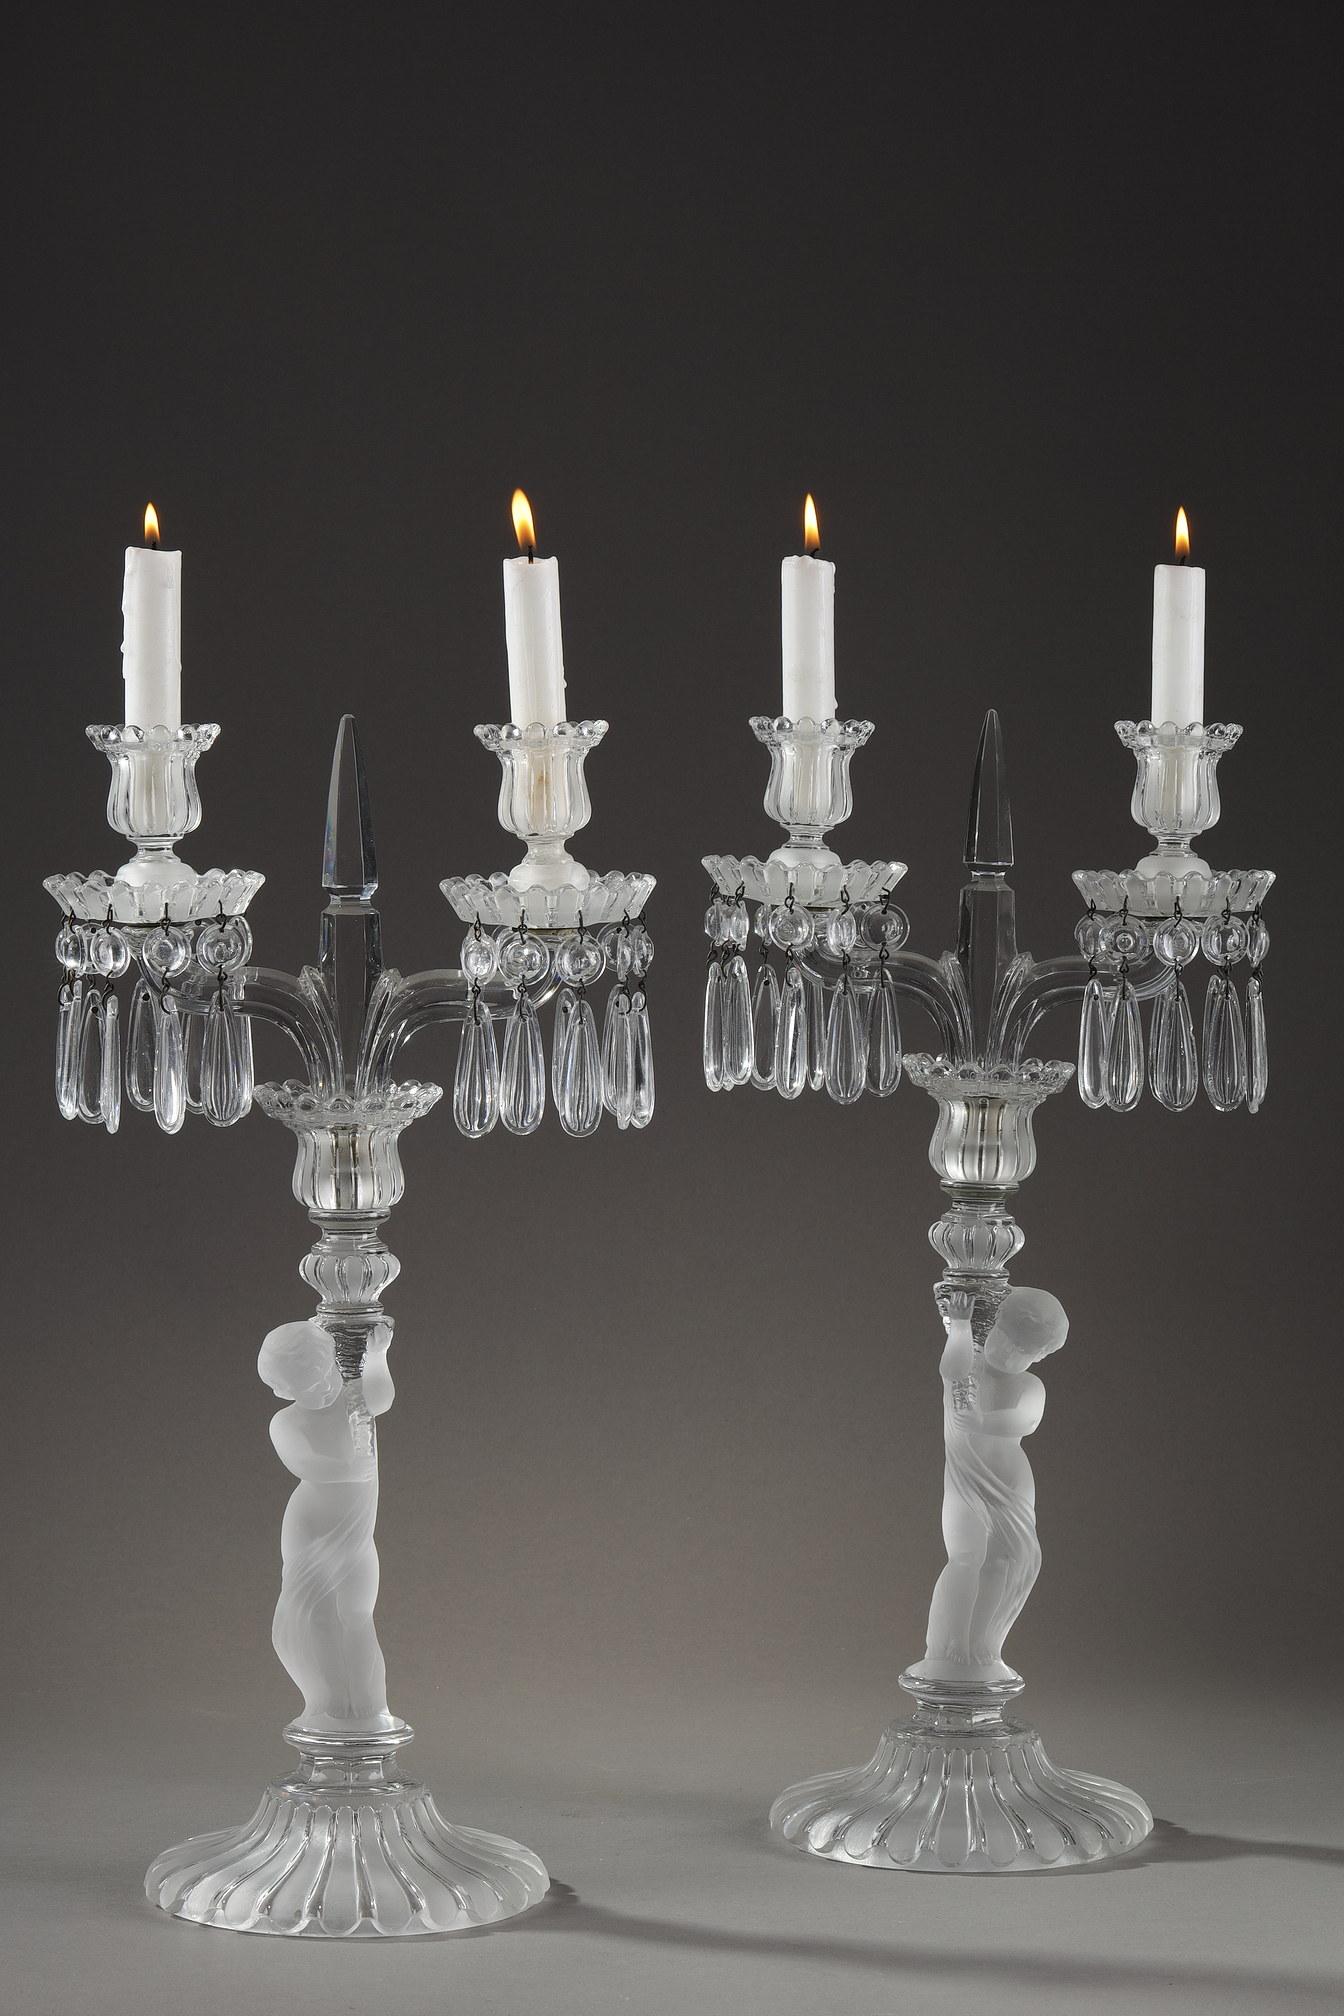 Pair of Candelabras in Baccarat Crystal 12